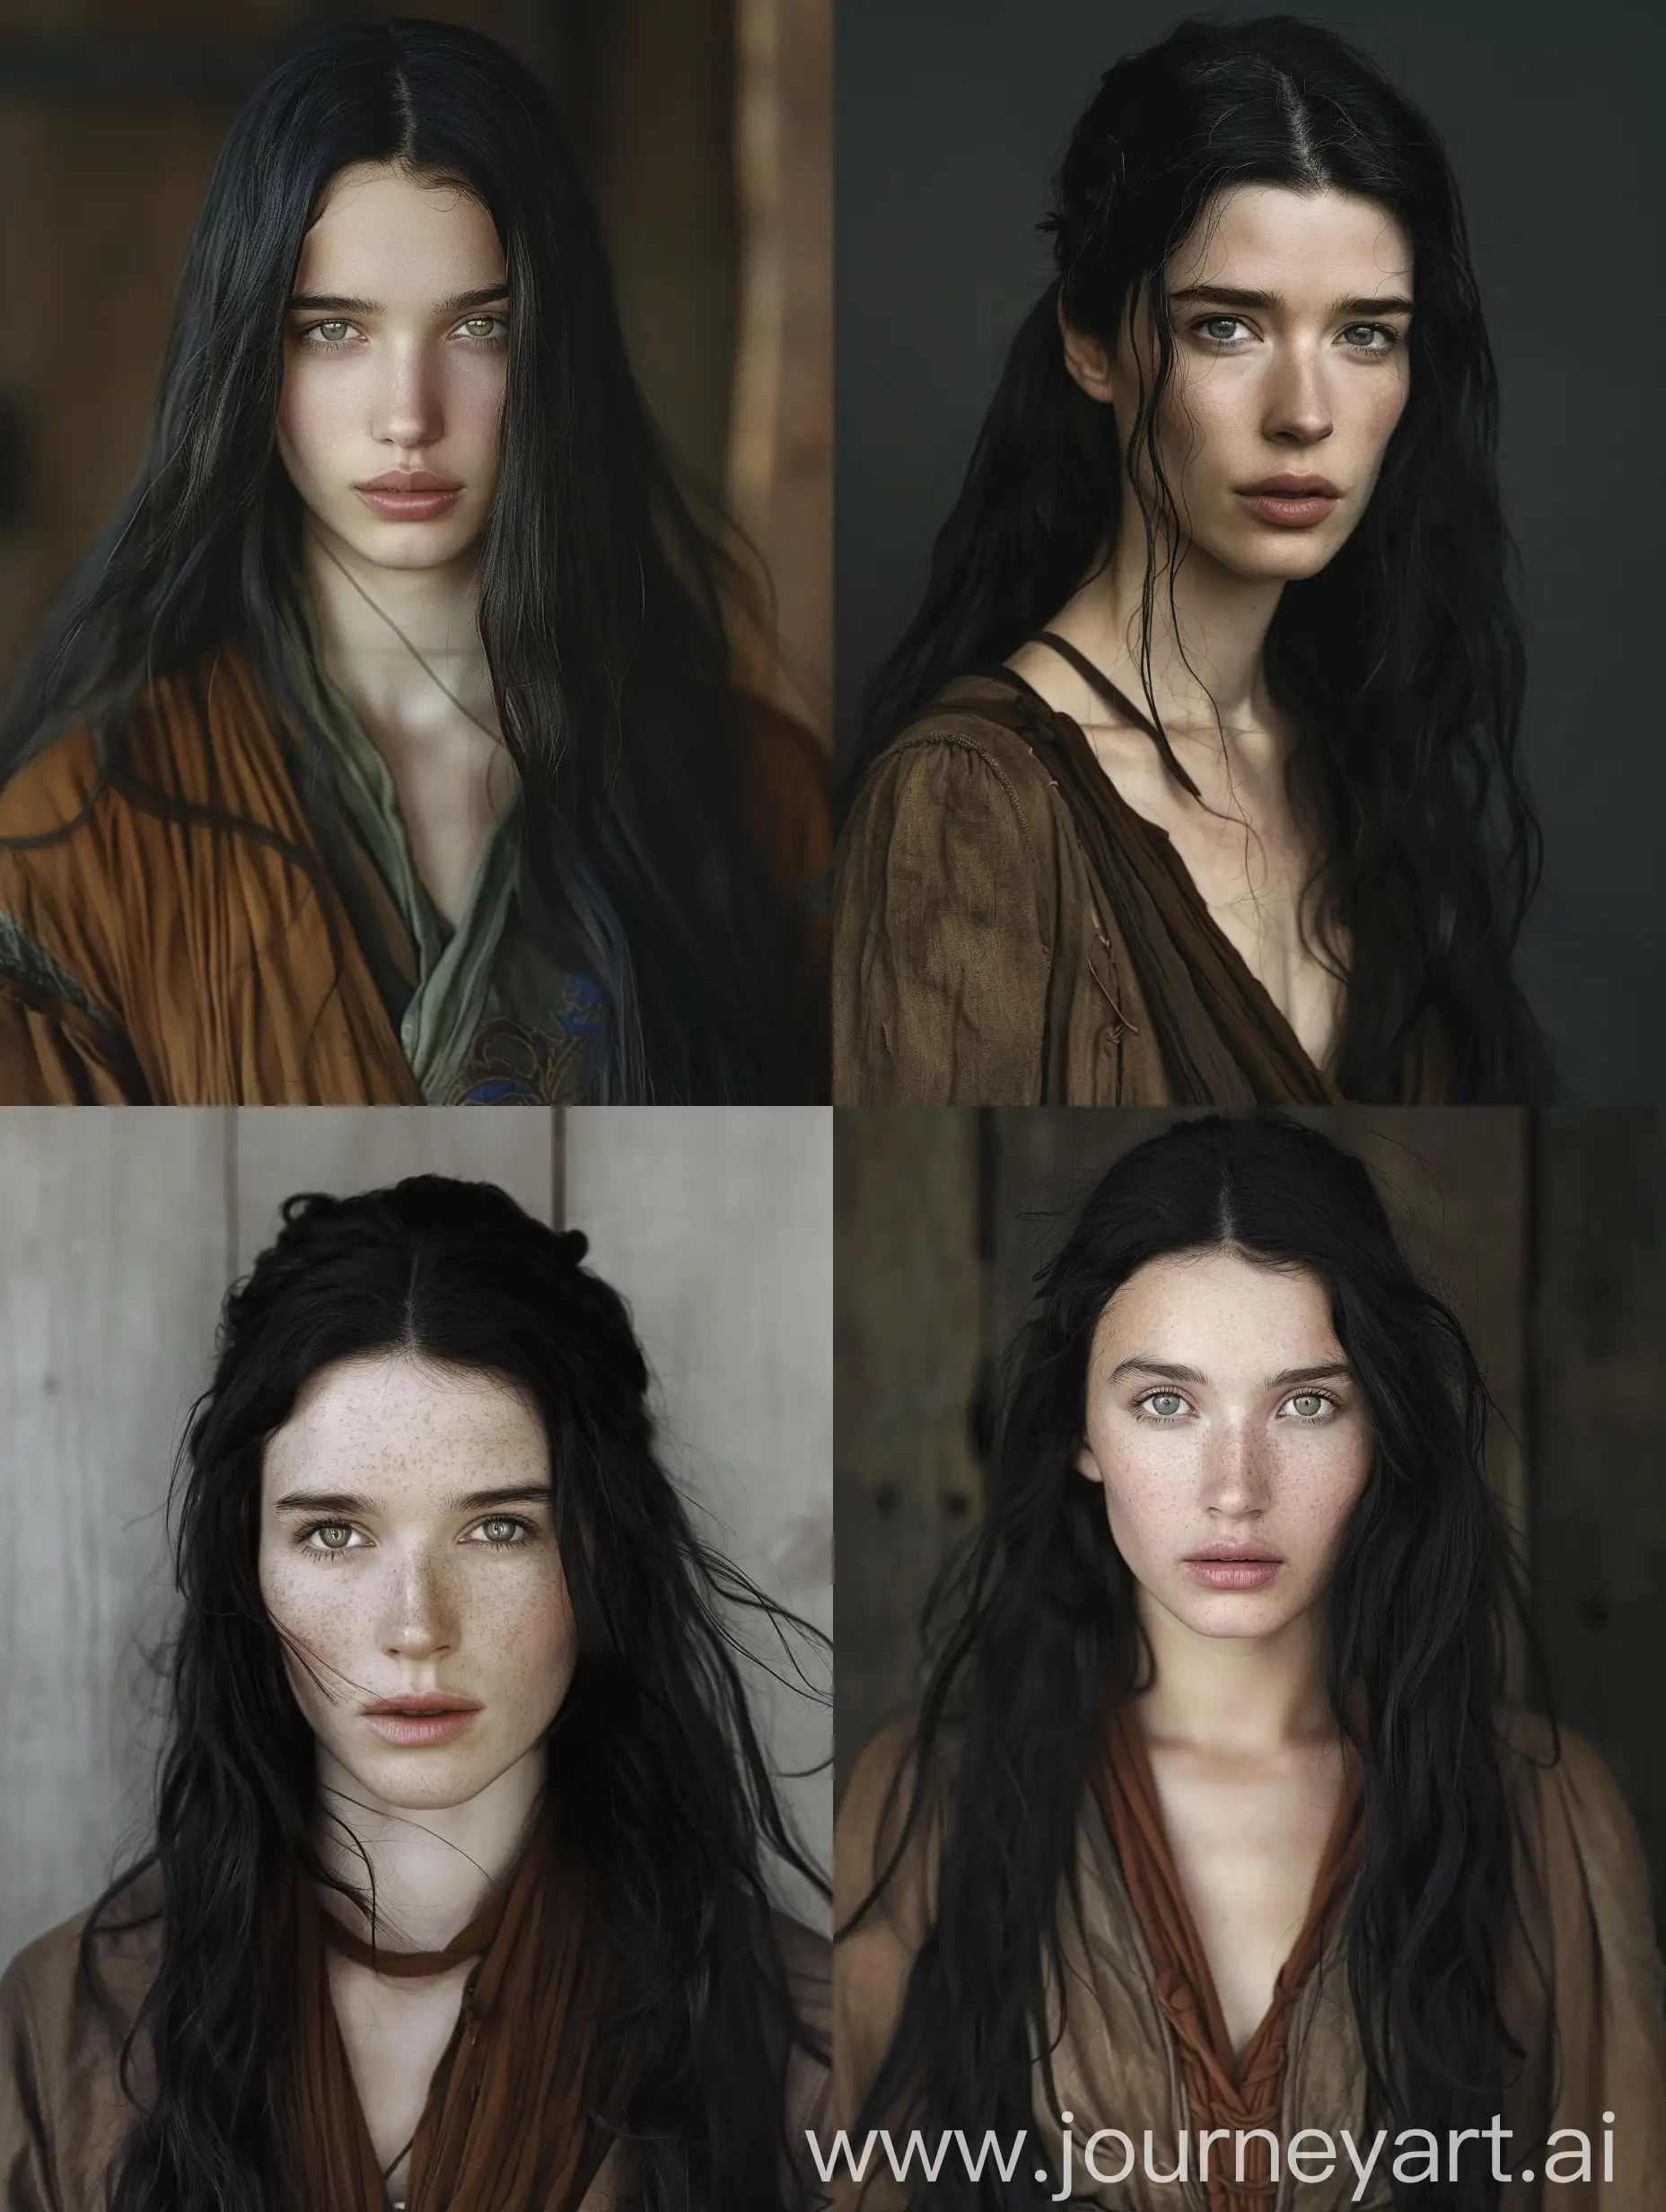 A woman who looks a lot like the actress Àstrid Bergès-Frisbey, except her nose is sharper and thinner. She has long black hair that is slightly wavy, grey-brown eyes, pale skin. She is not what you would call overly beautiful, but she has a natural handsomeness. She looks about 25 years old. She is wearing brown travel clothes like in a medieval fantasy world. She is not smiling. When She wants to, she can look very intimidating, not at all like a round-faced girl, but a fearsome warrior. She is slender though, and graceful.